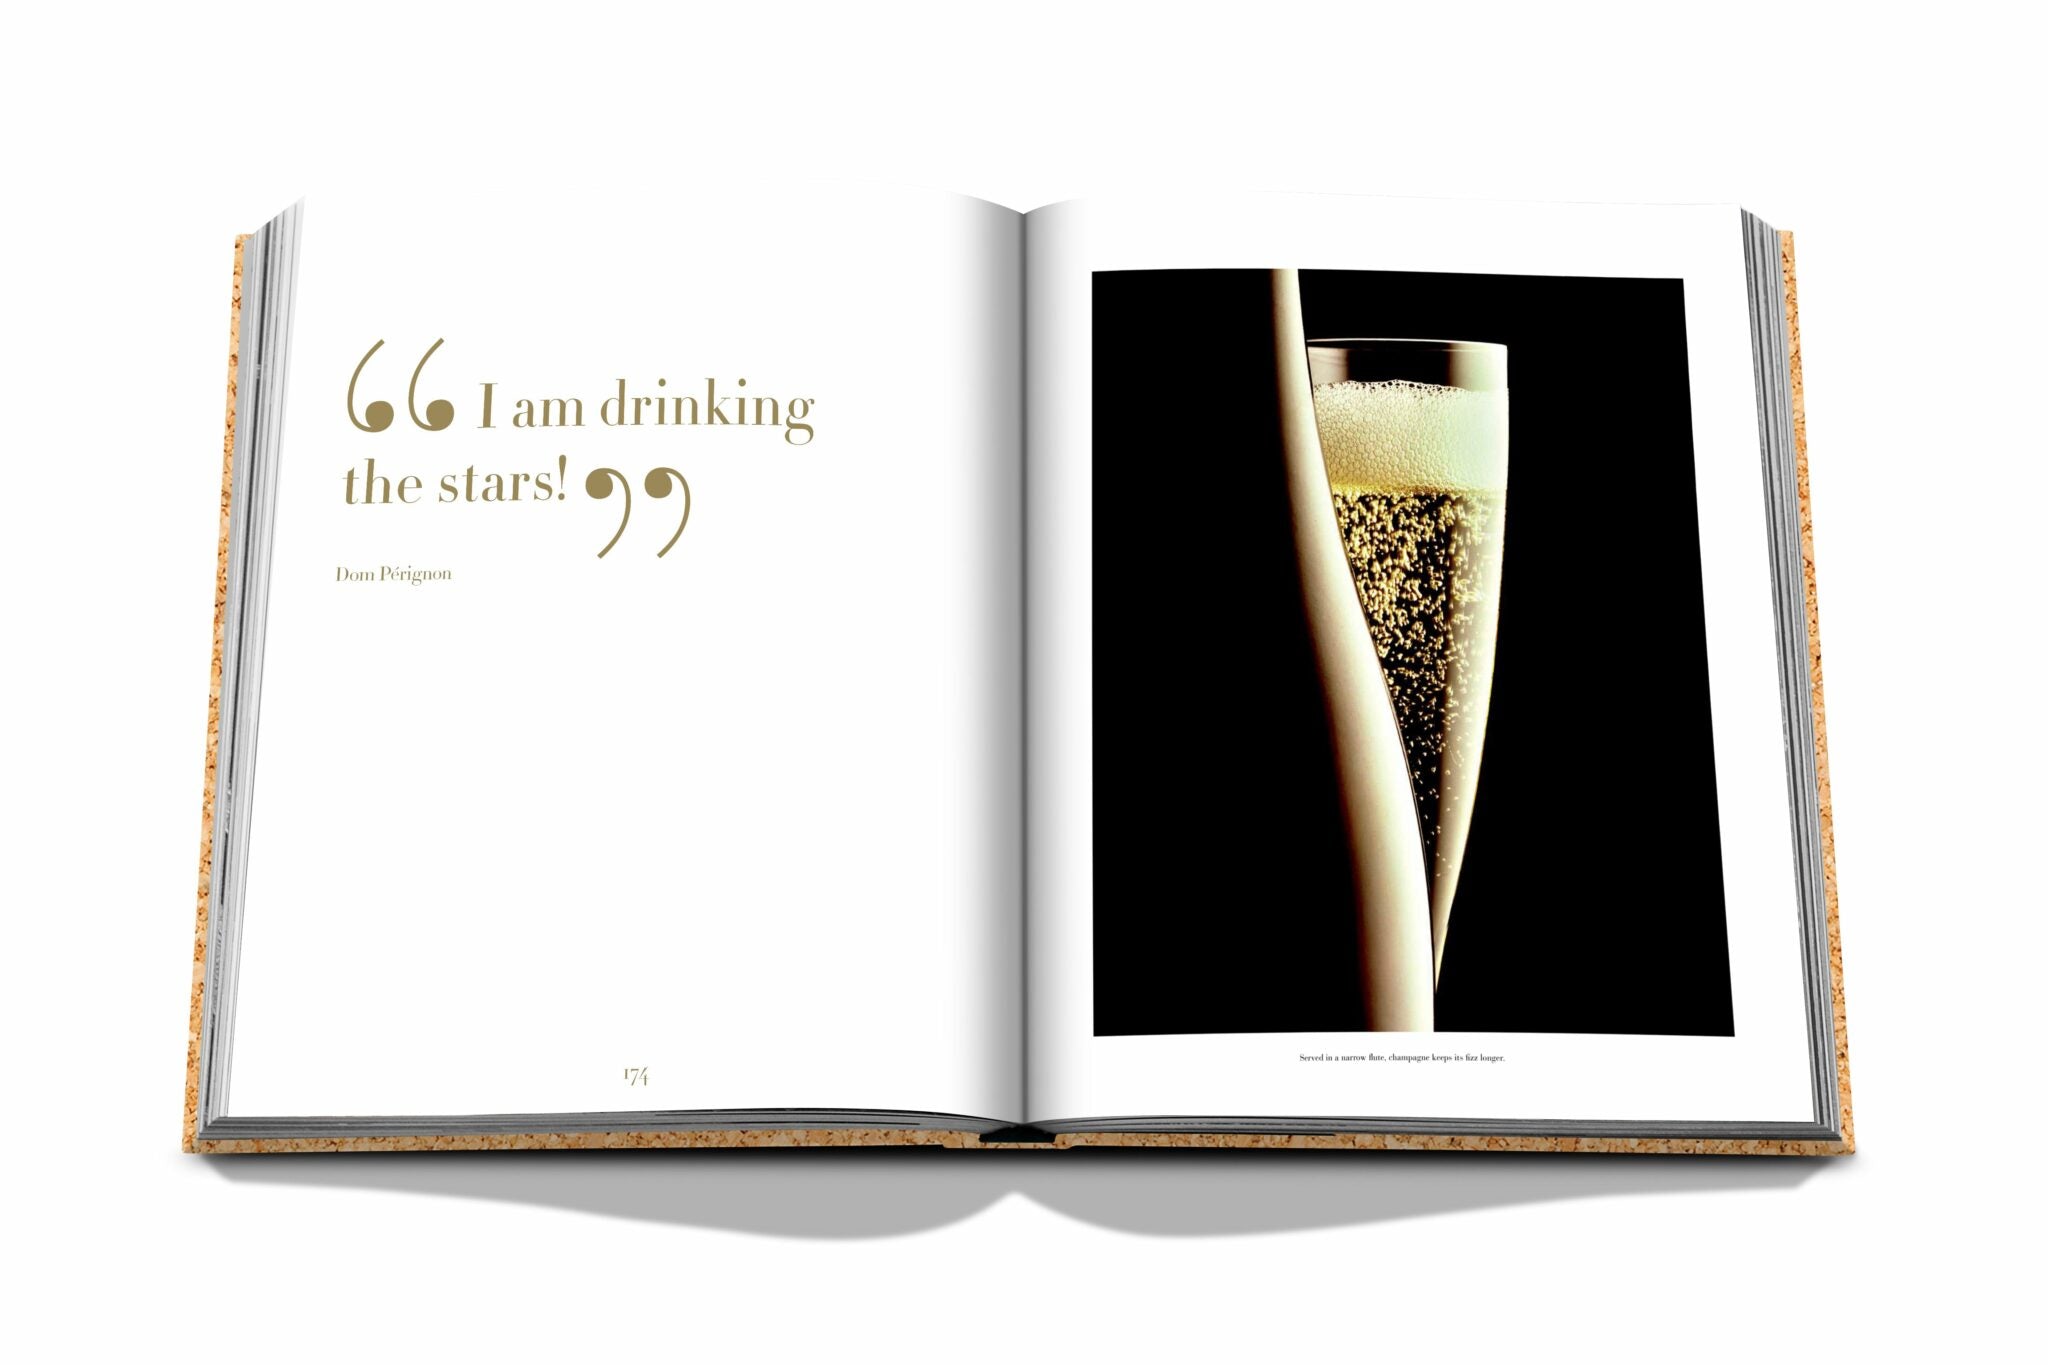 Assouline The Impossible Collection Of Champagne